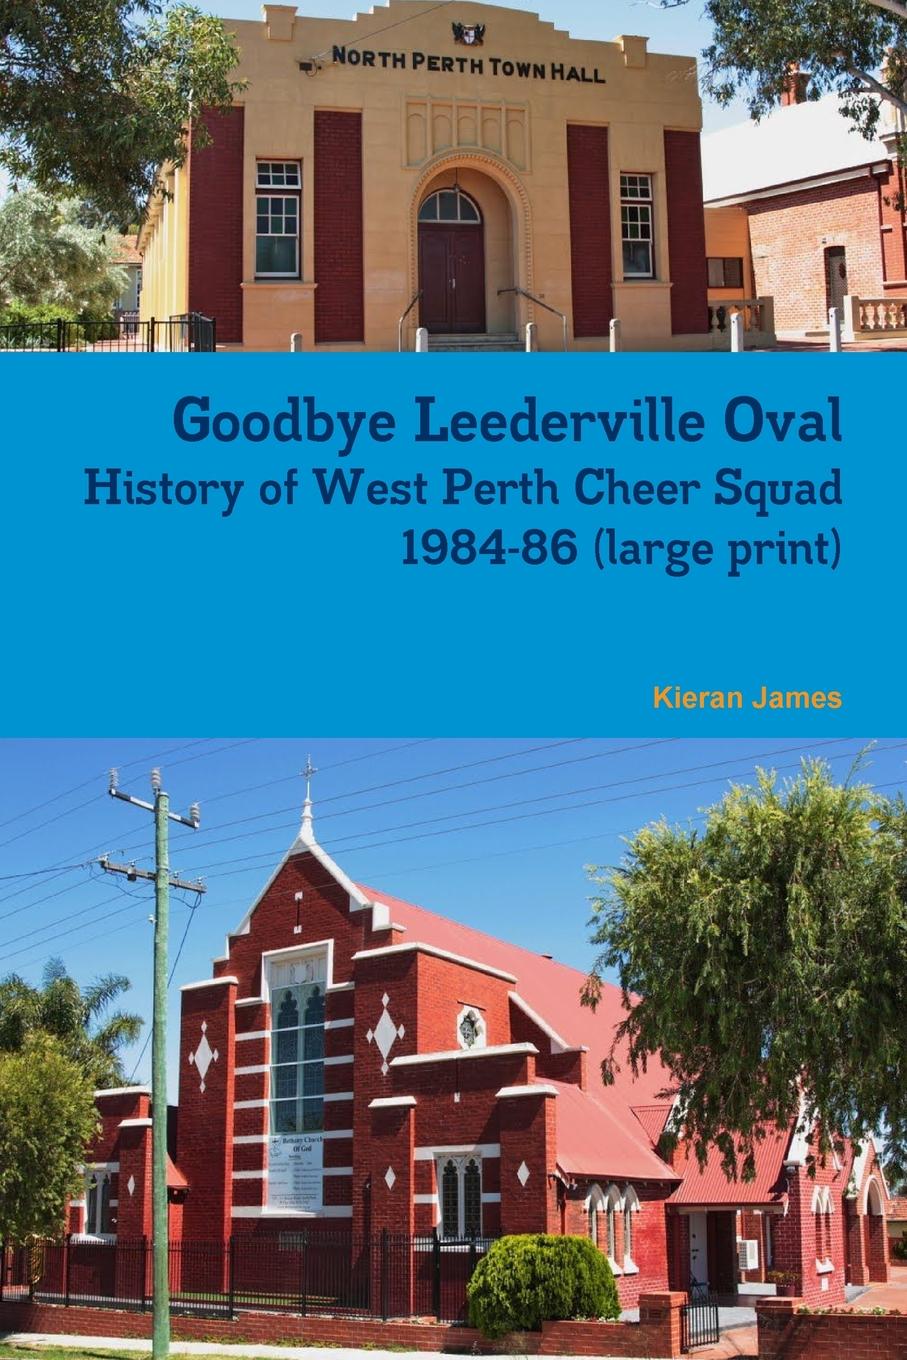 Kieran James Goodbye Leederville Oval. History of West Perth Cheer Squad 1984-86 (large print)